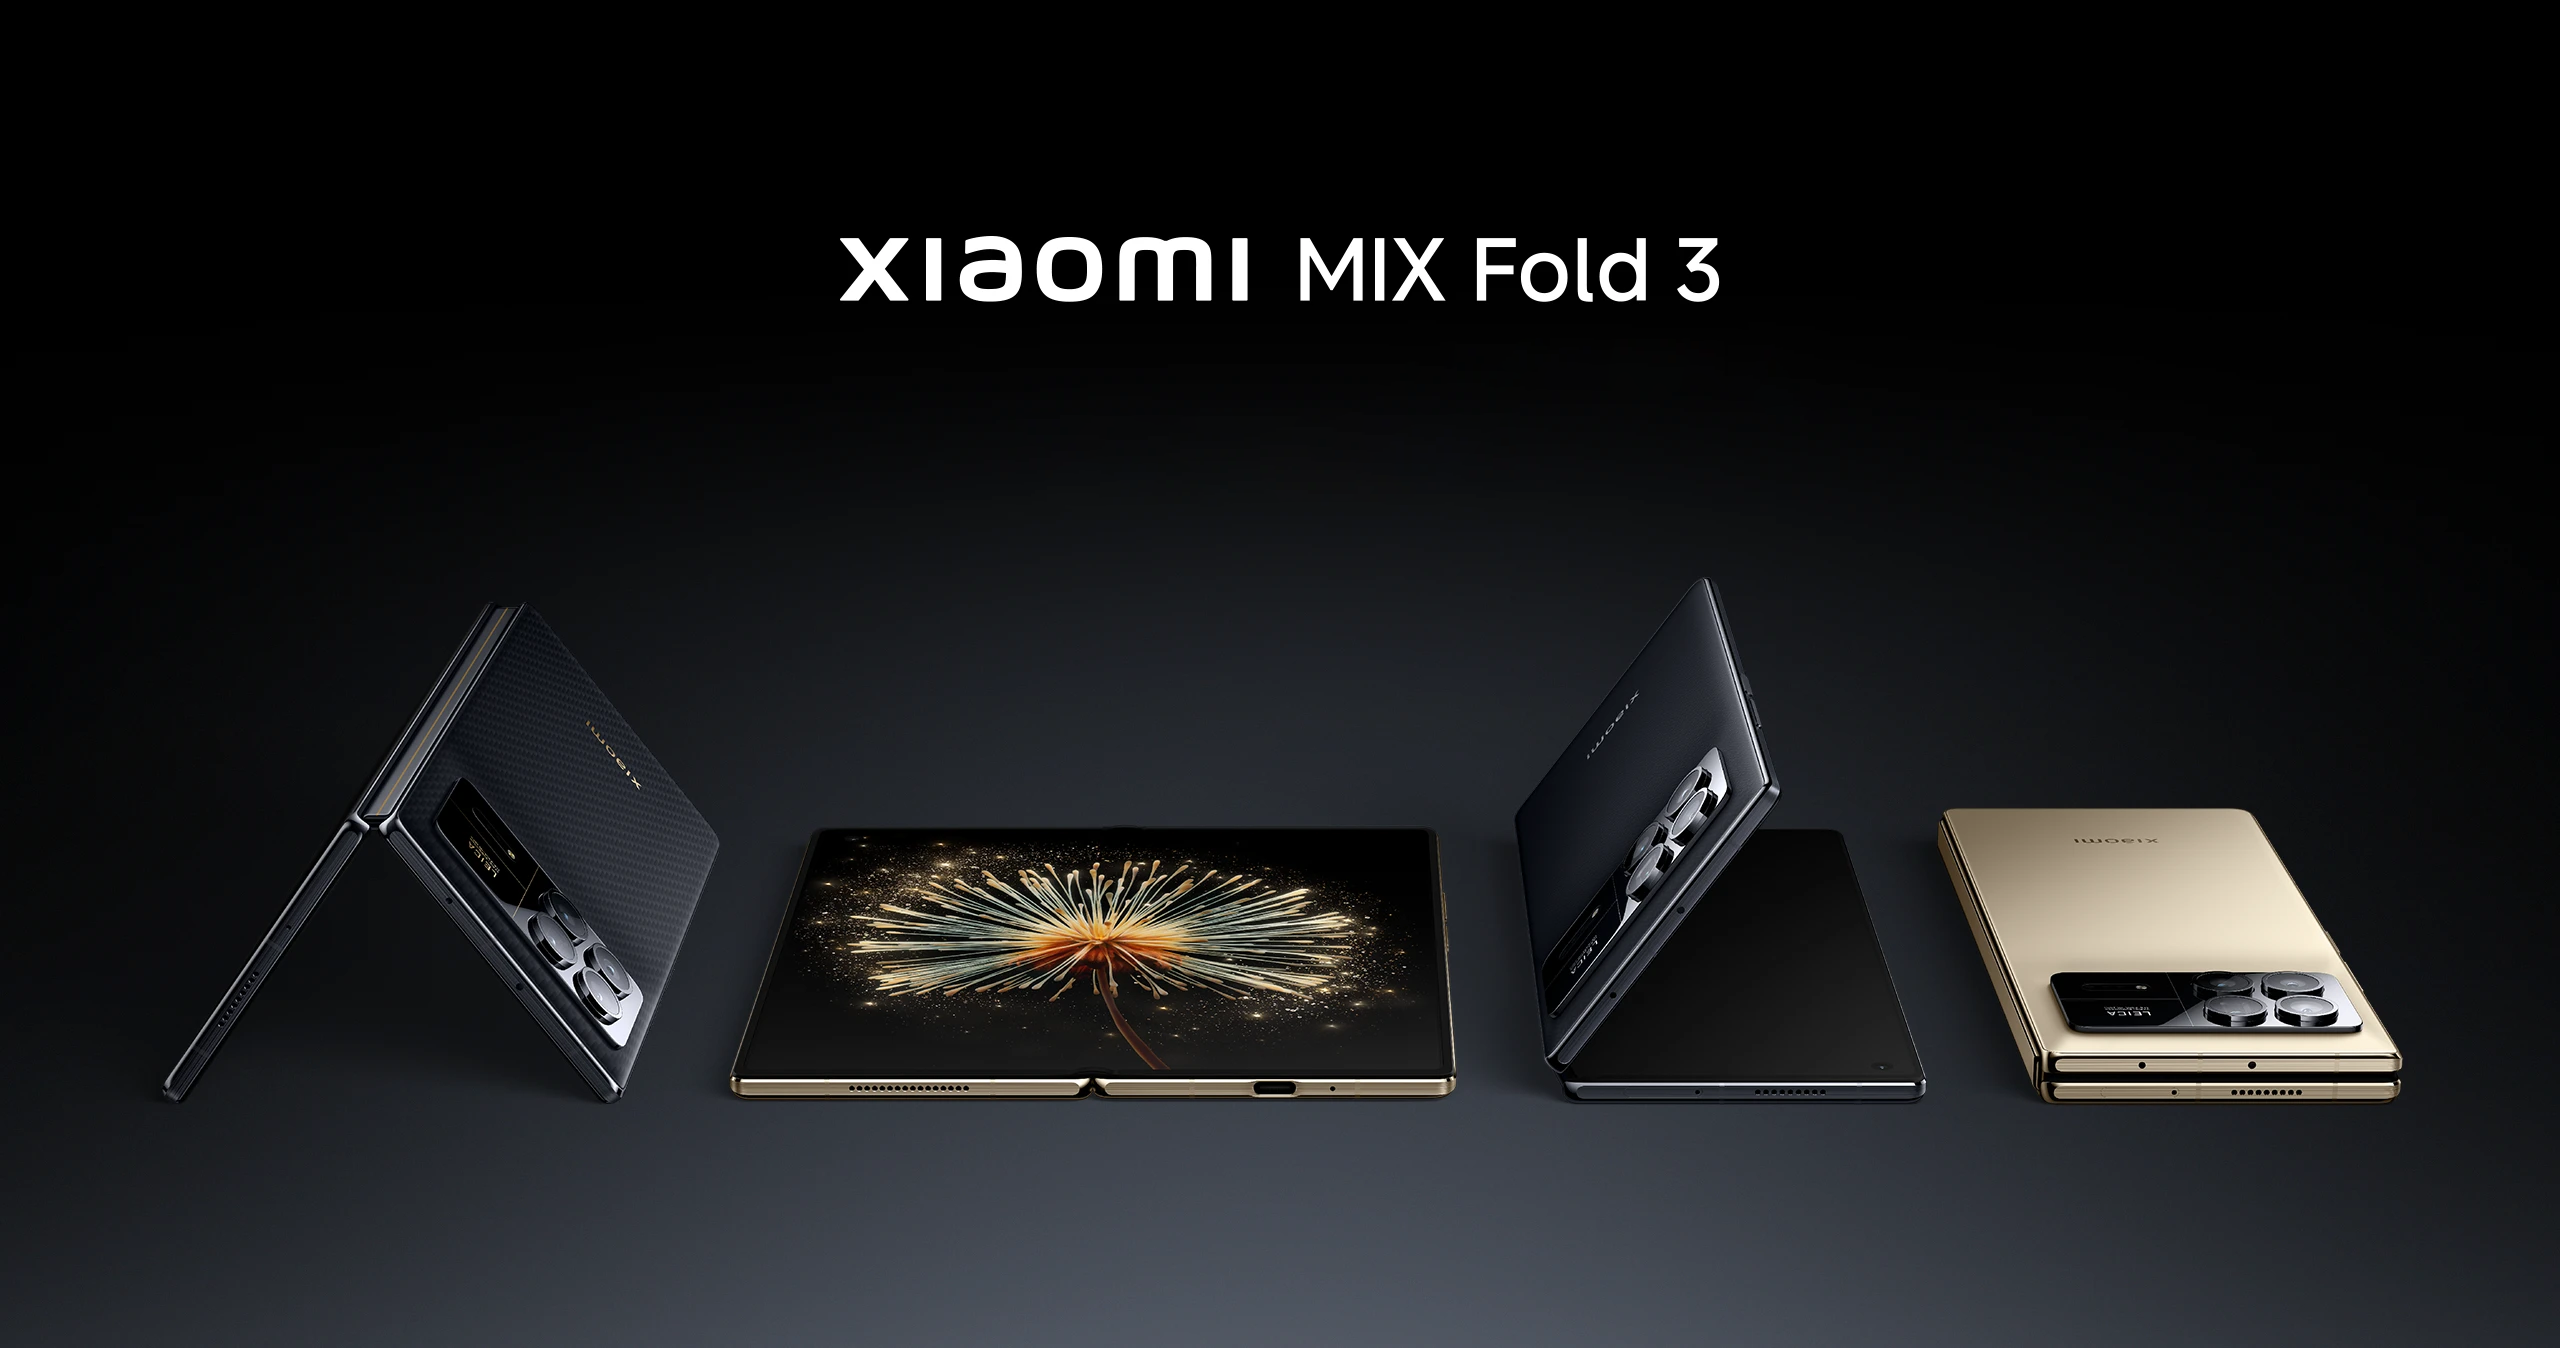 Xiaomi Mix Fold 3: The thinnest foldable with a new improved hinge